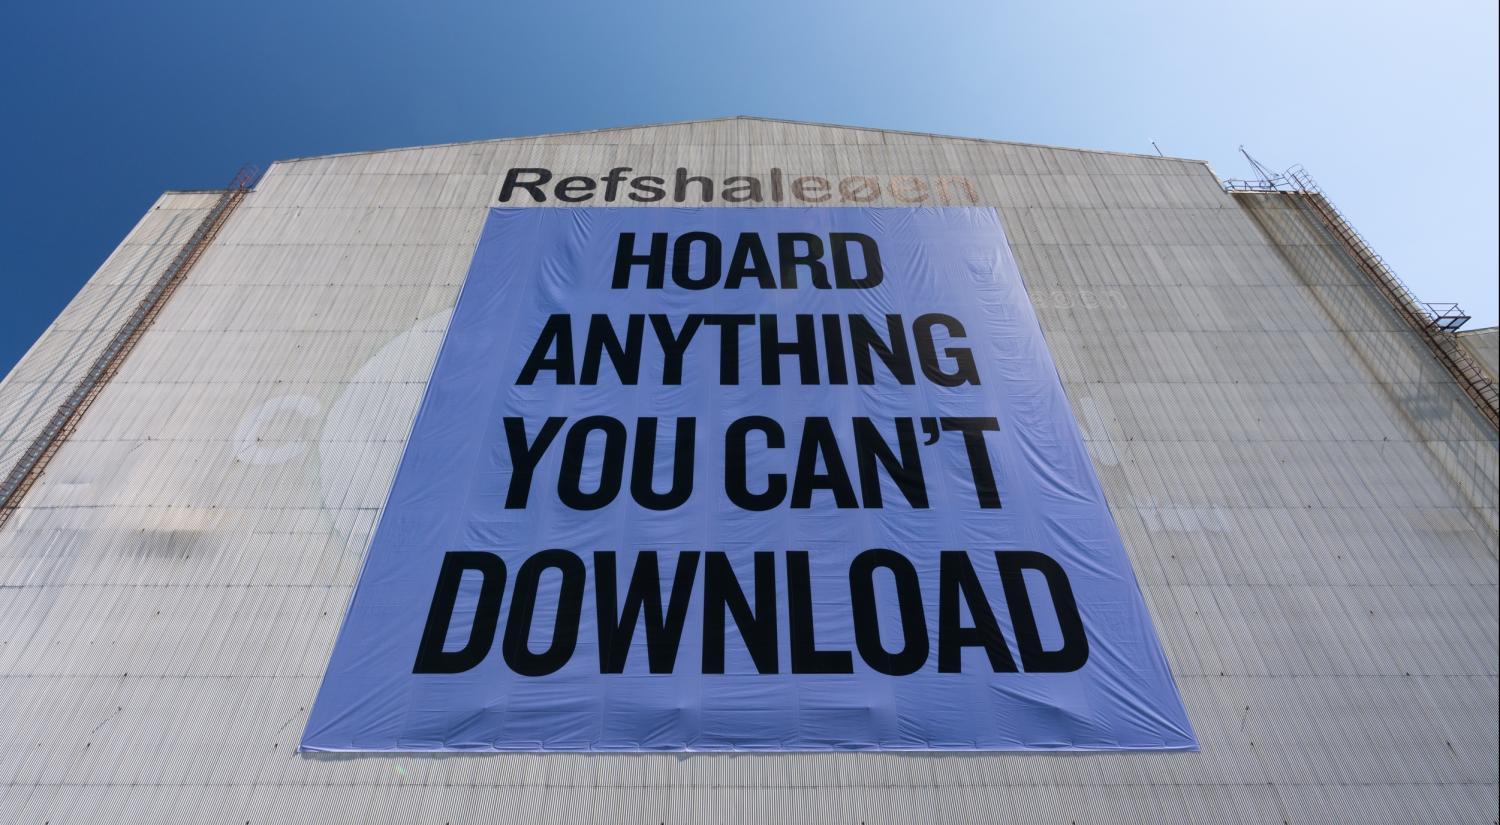 Douglas Coupland, Hoard Anything You Can’t Download, 2013